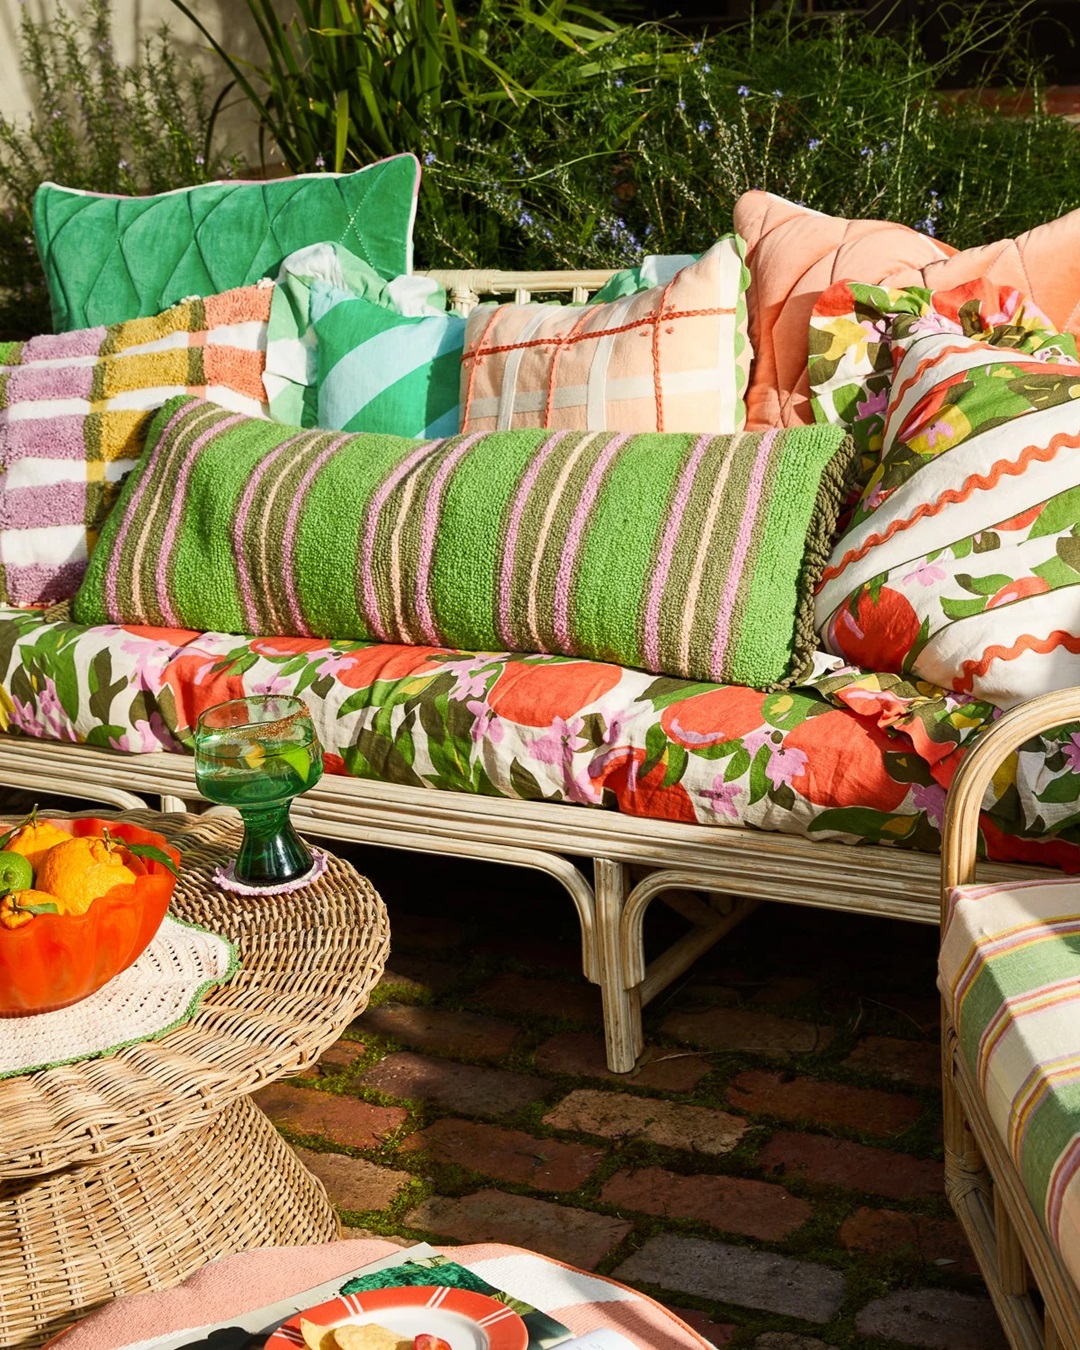 Green and pink stripe rectangle cushion with fringe on chair with other cushions and blanket